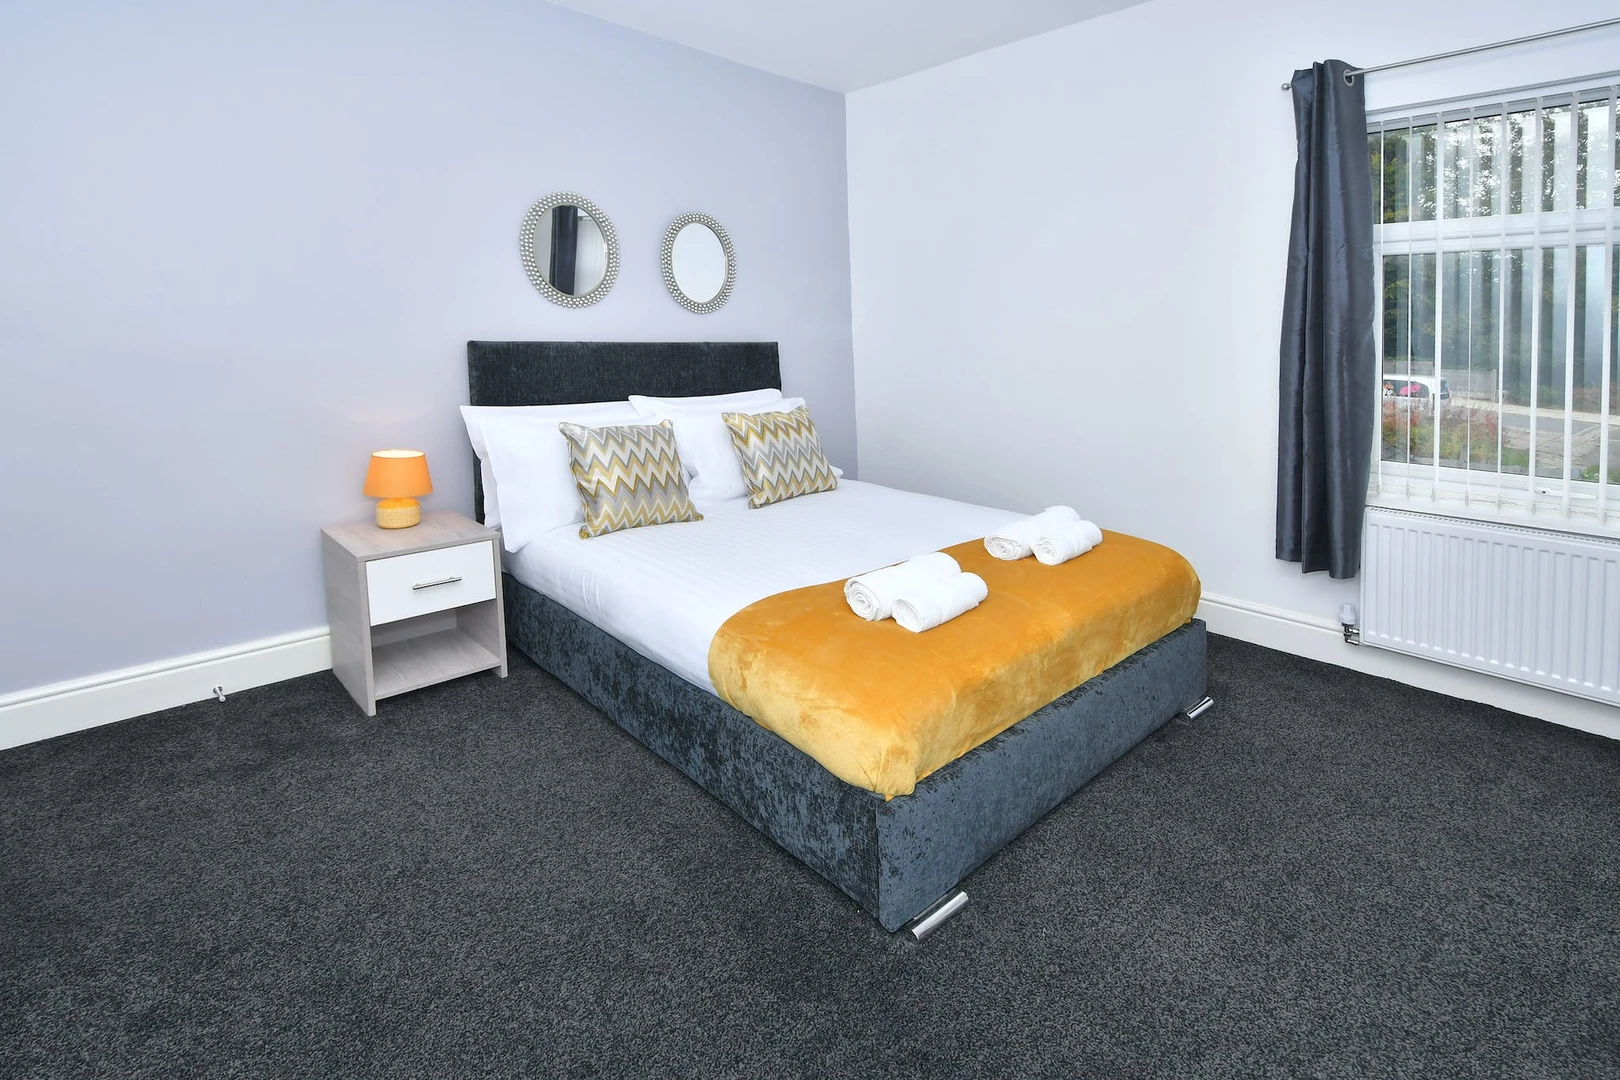 Accommodation in the centre of Stoke-on-trent